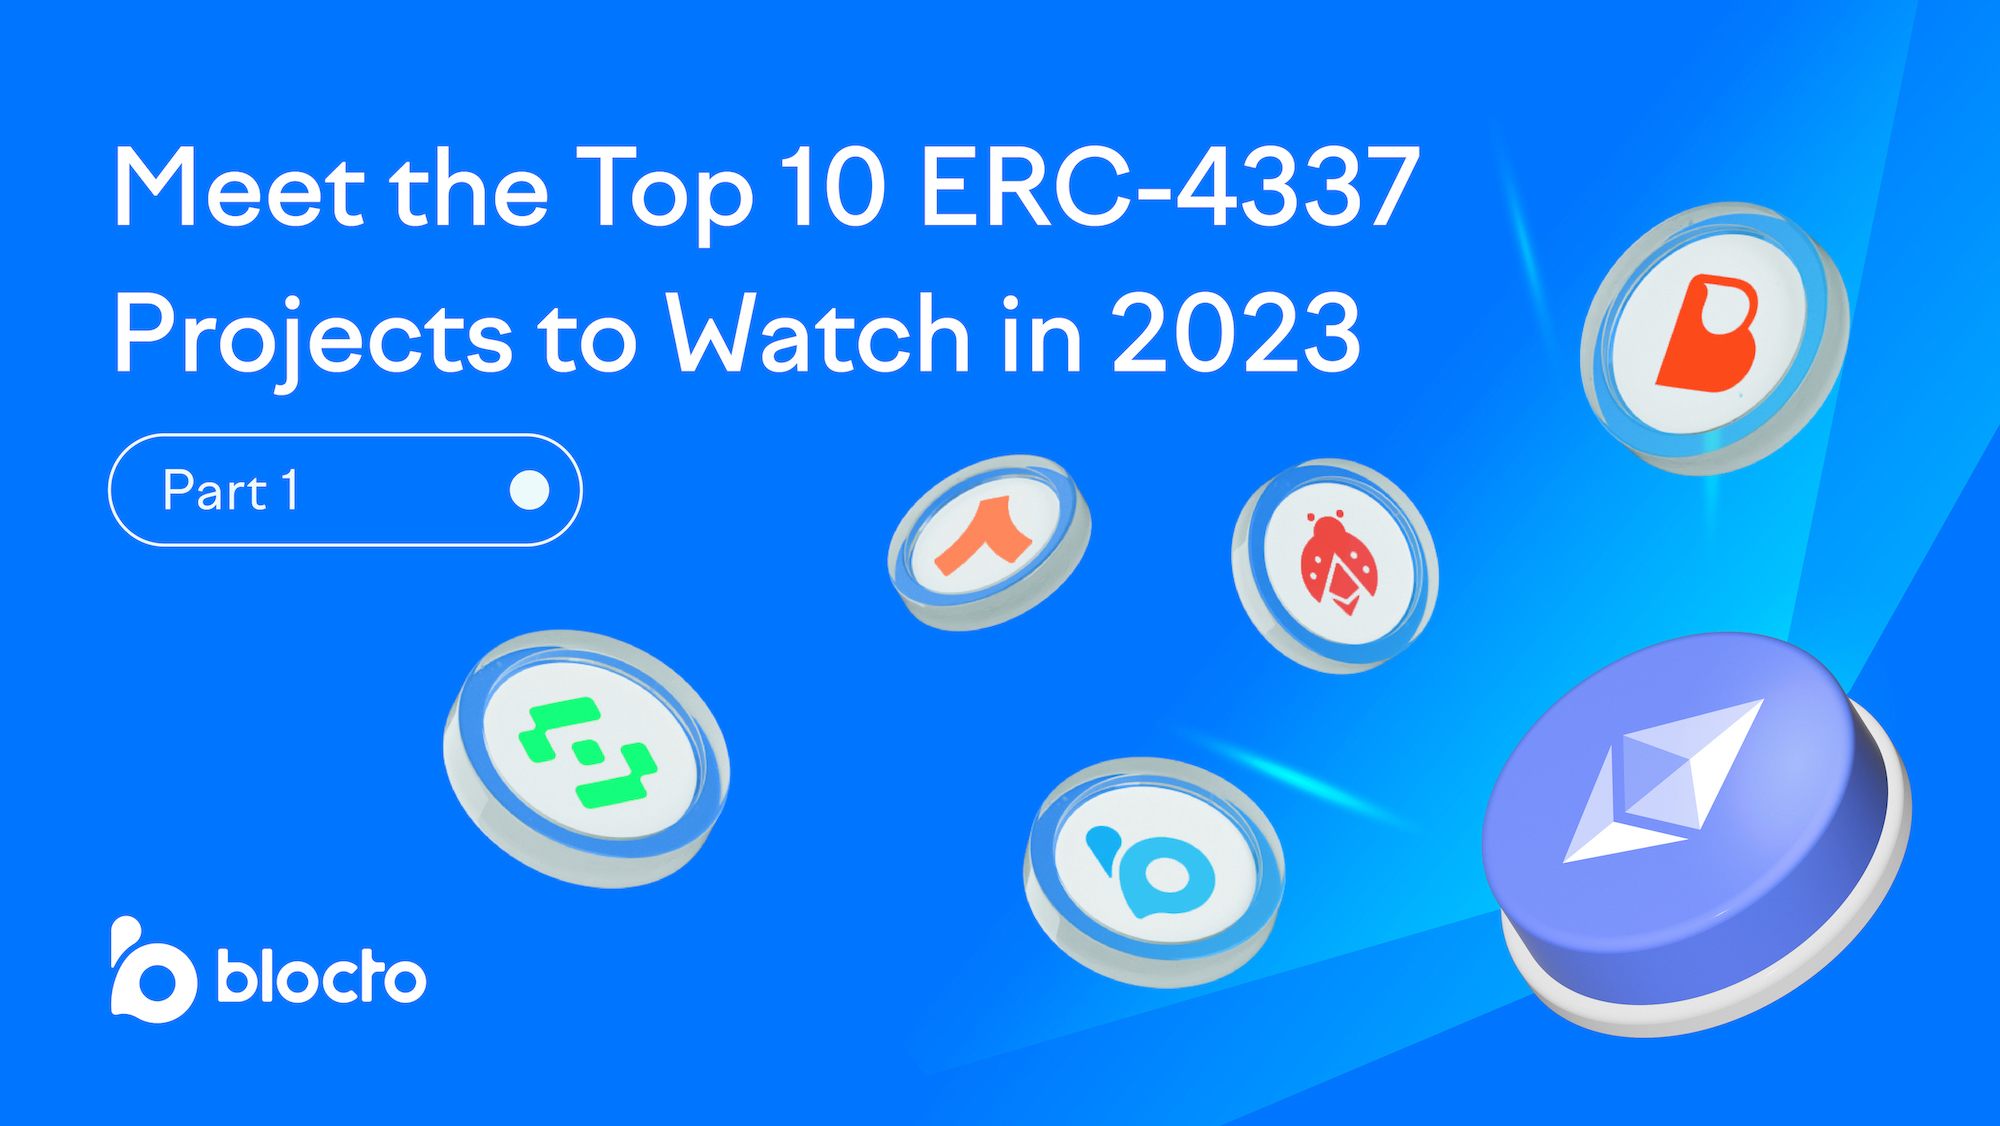 meet the top 10 ERC-4337 projects to watch in 2023